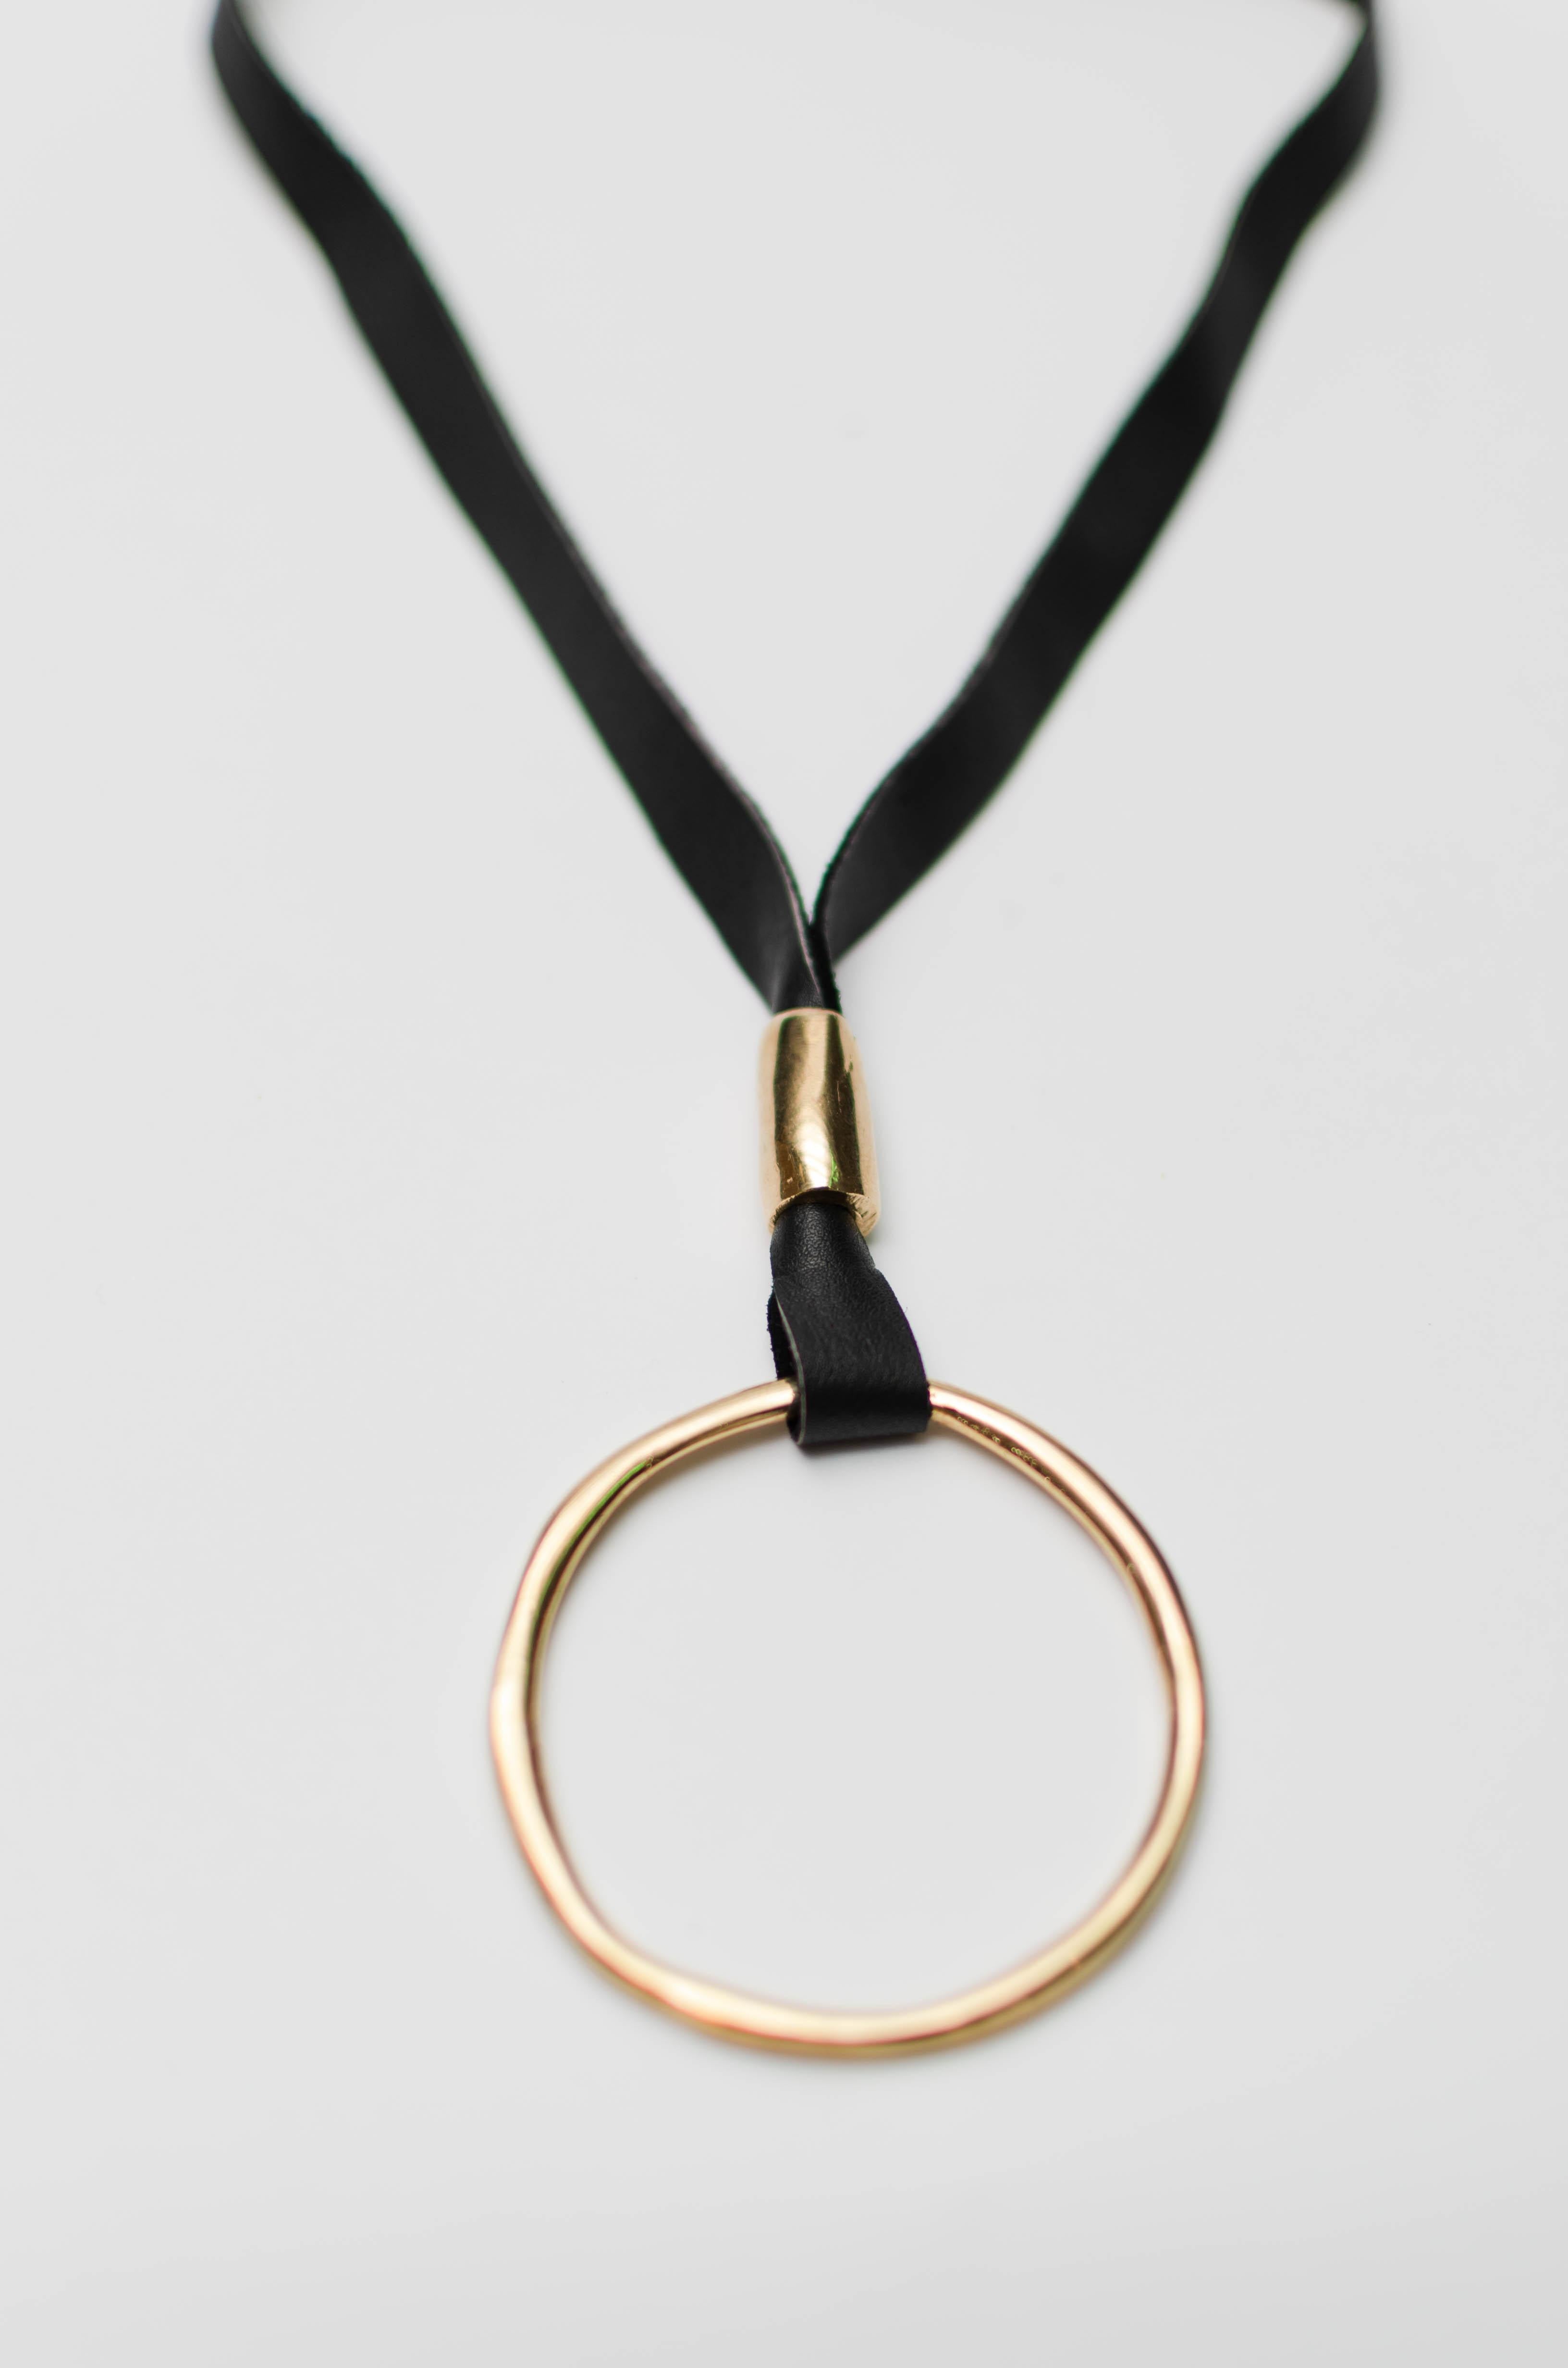 These pieces were designed, hand-carved, and then cast from our workshop in Uruguay.
Beautiful necklace with a delicate gold-plated silver pendant with a natural leather cord and gold-plated silver terminals.
All these processes make a truly unique